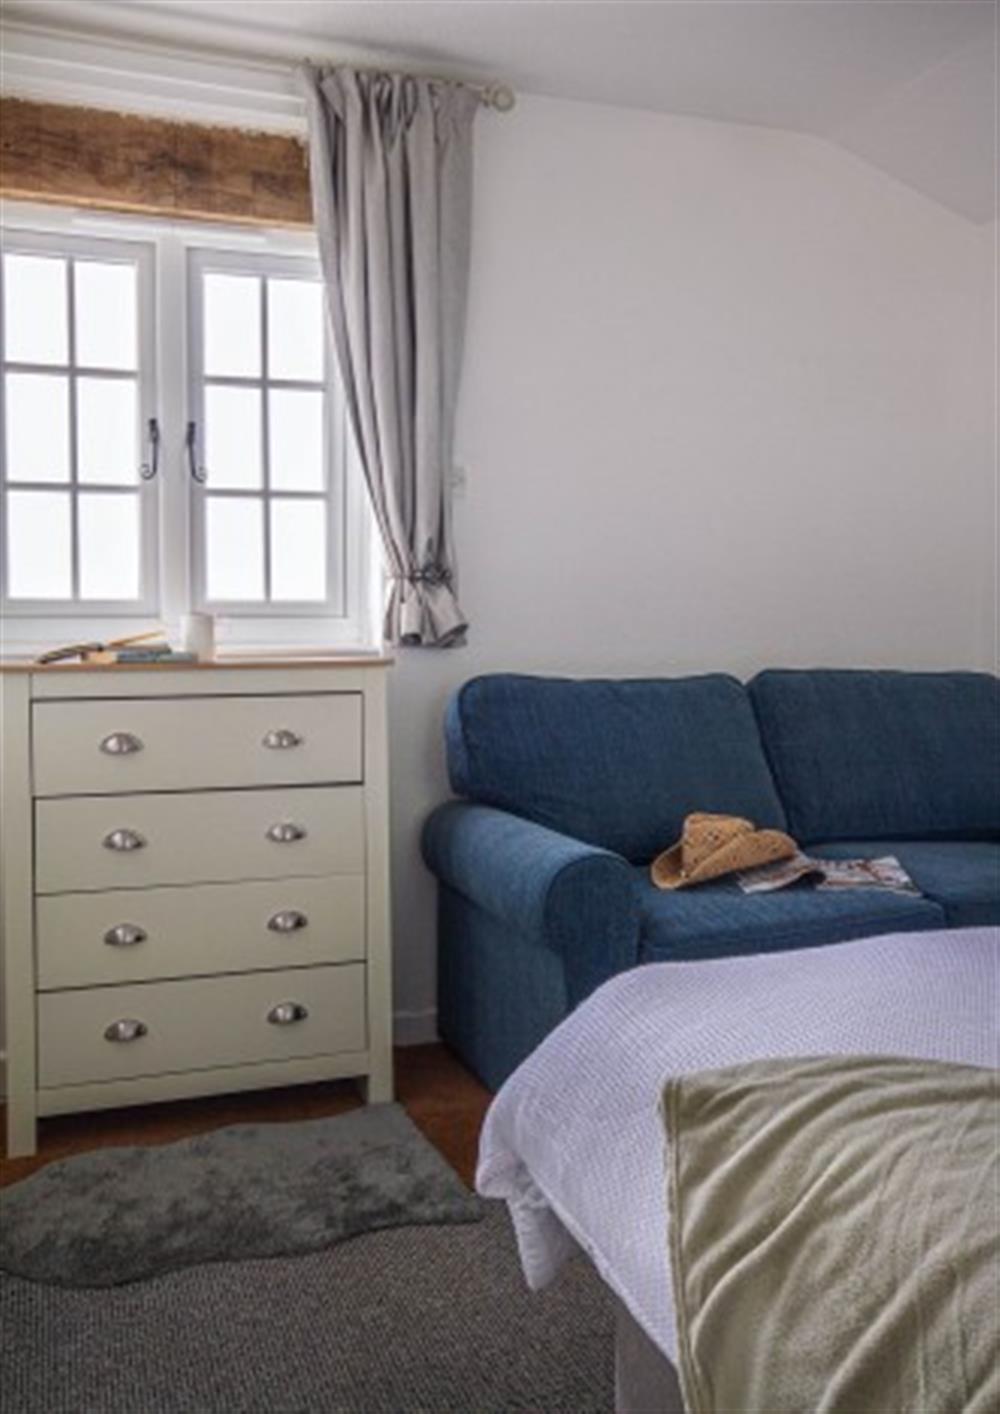 Ample storage space provided at Foxglove Cottage in Launceston